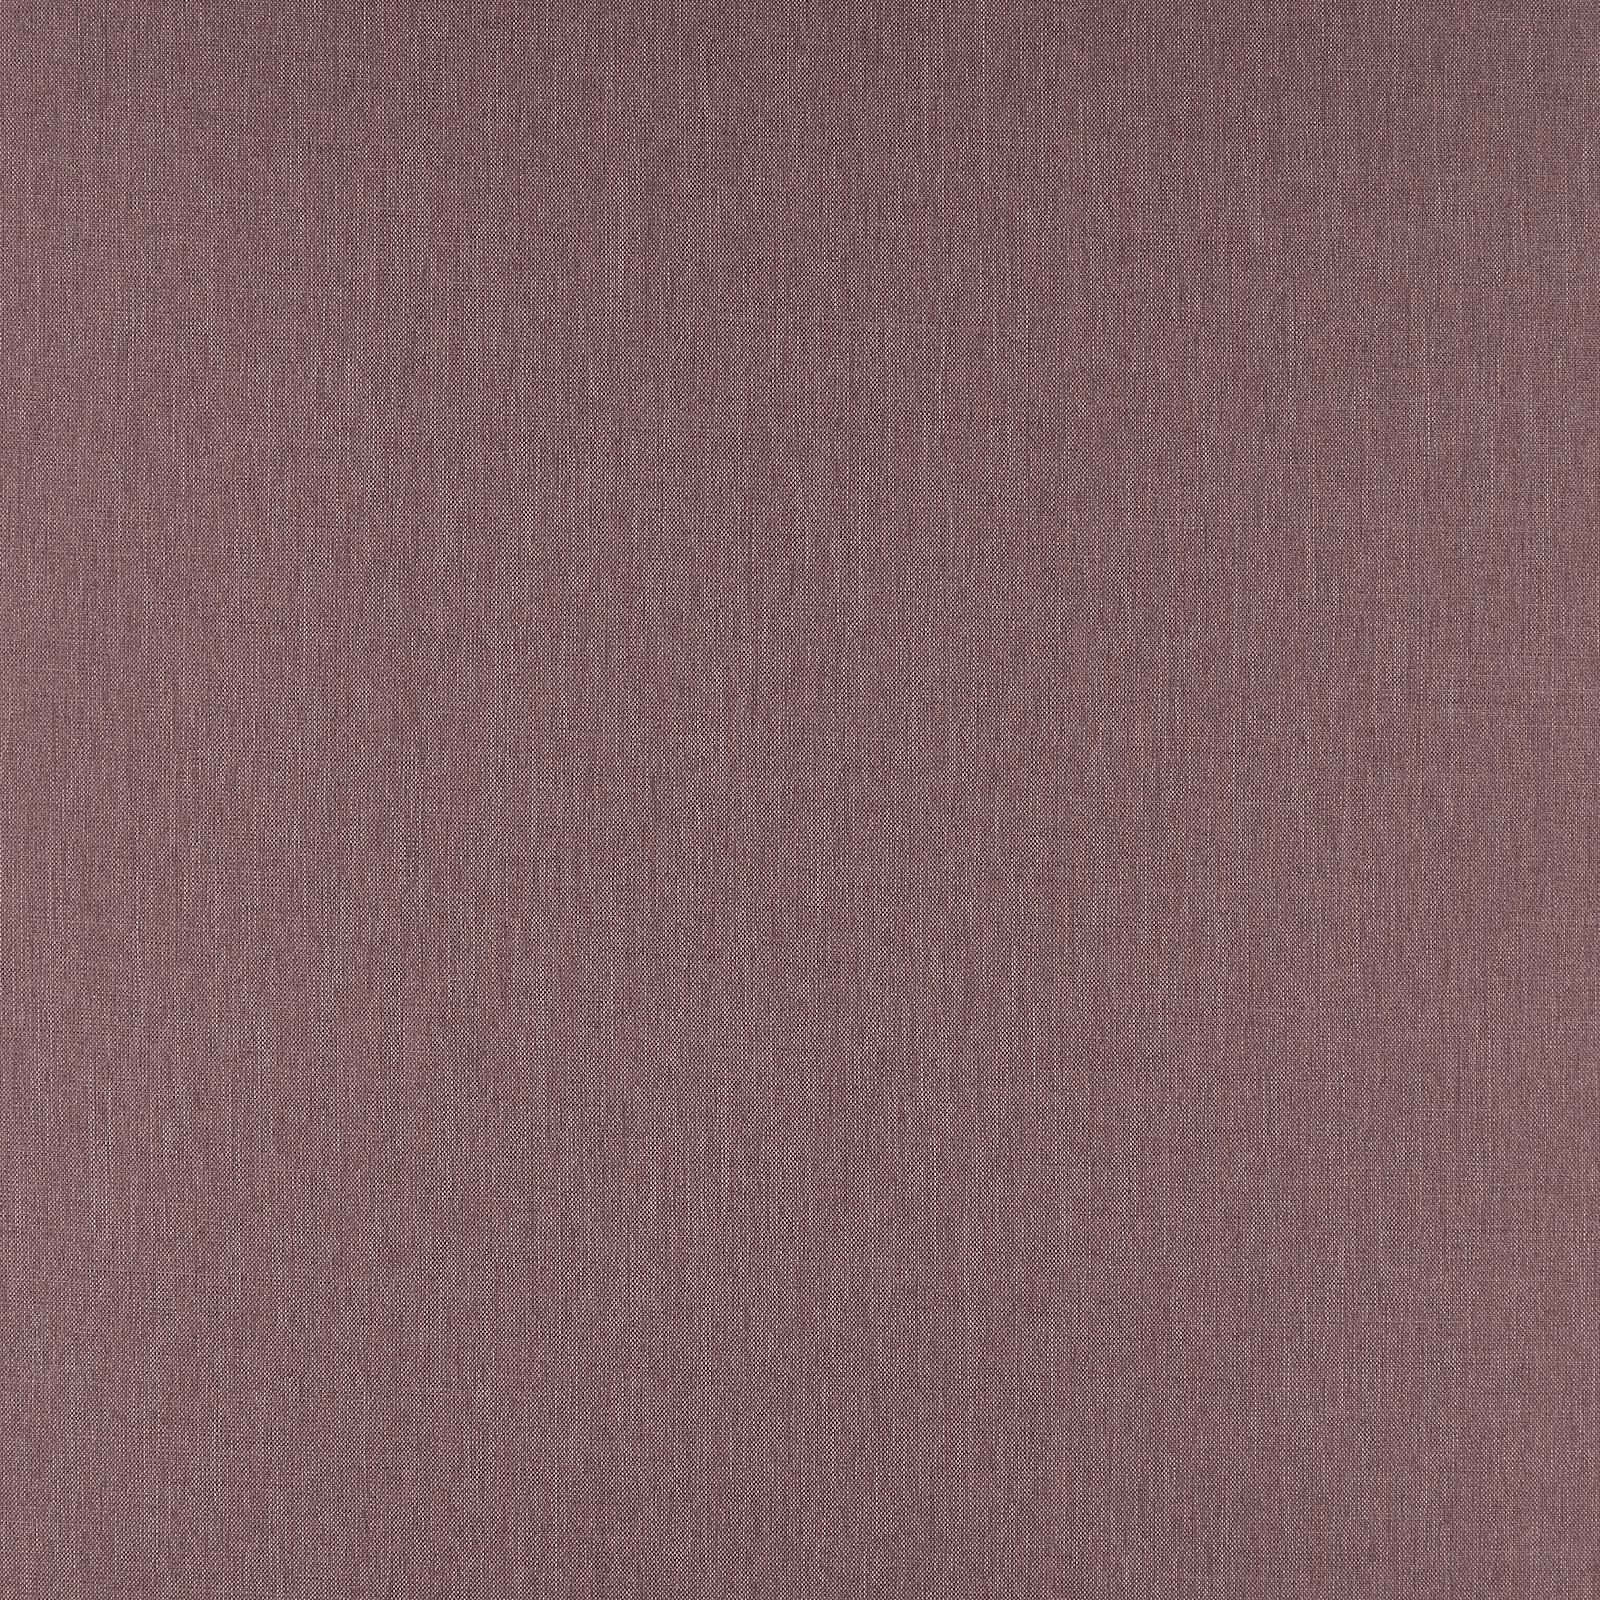 Upholstery fabric heather melange 826587_pack_solid